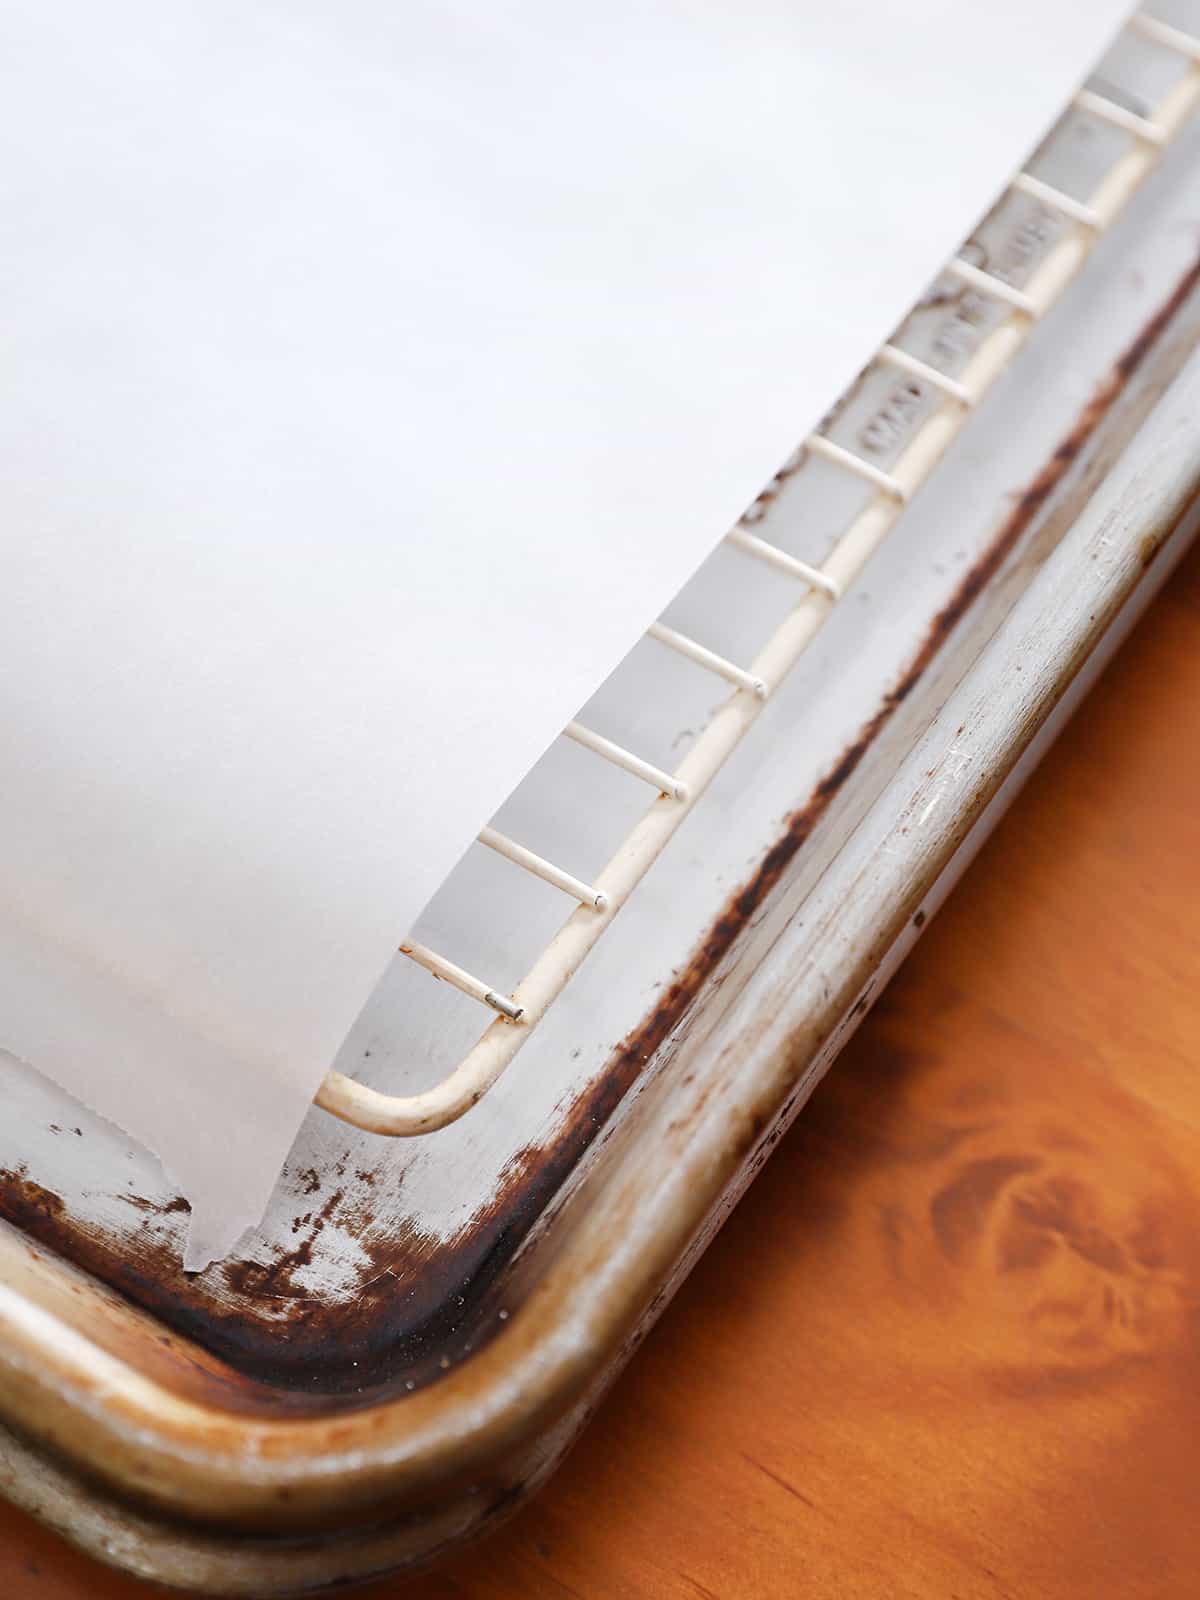 A baking sheet with a wire rack and parchment paper.